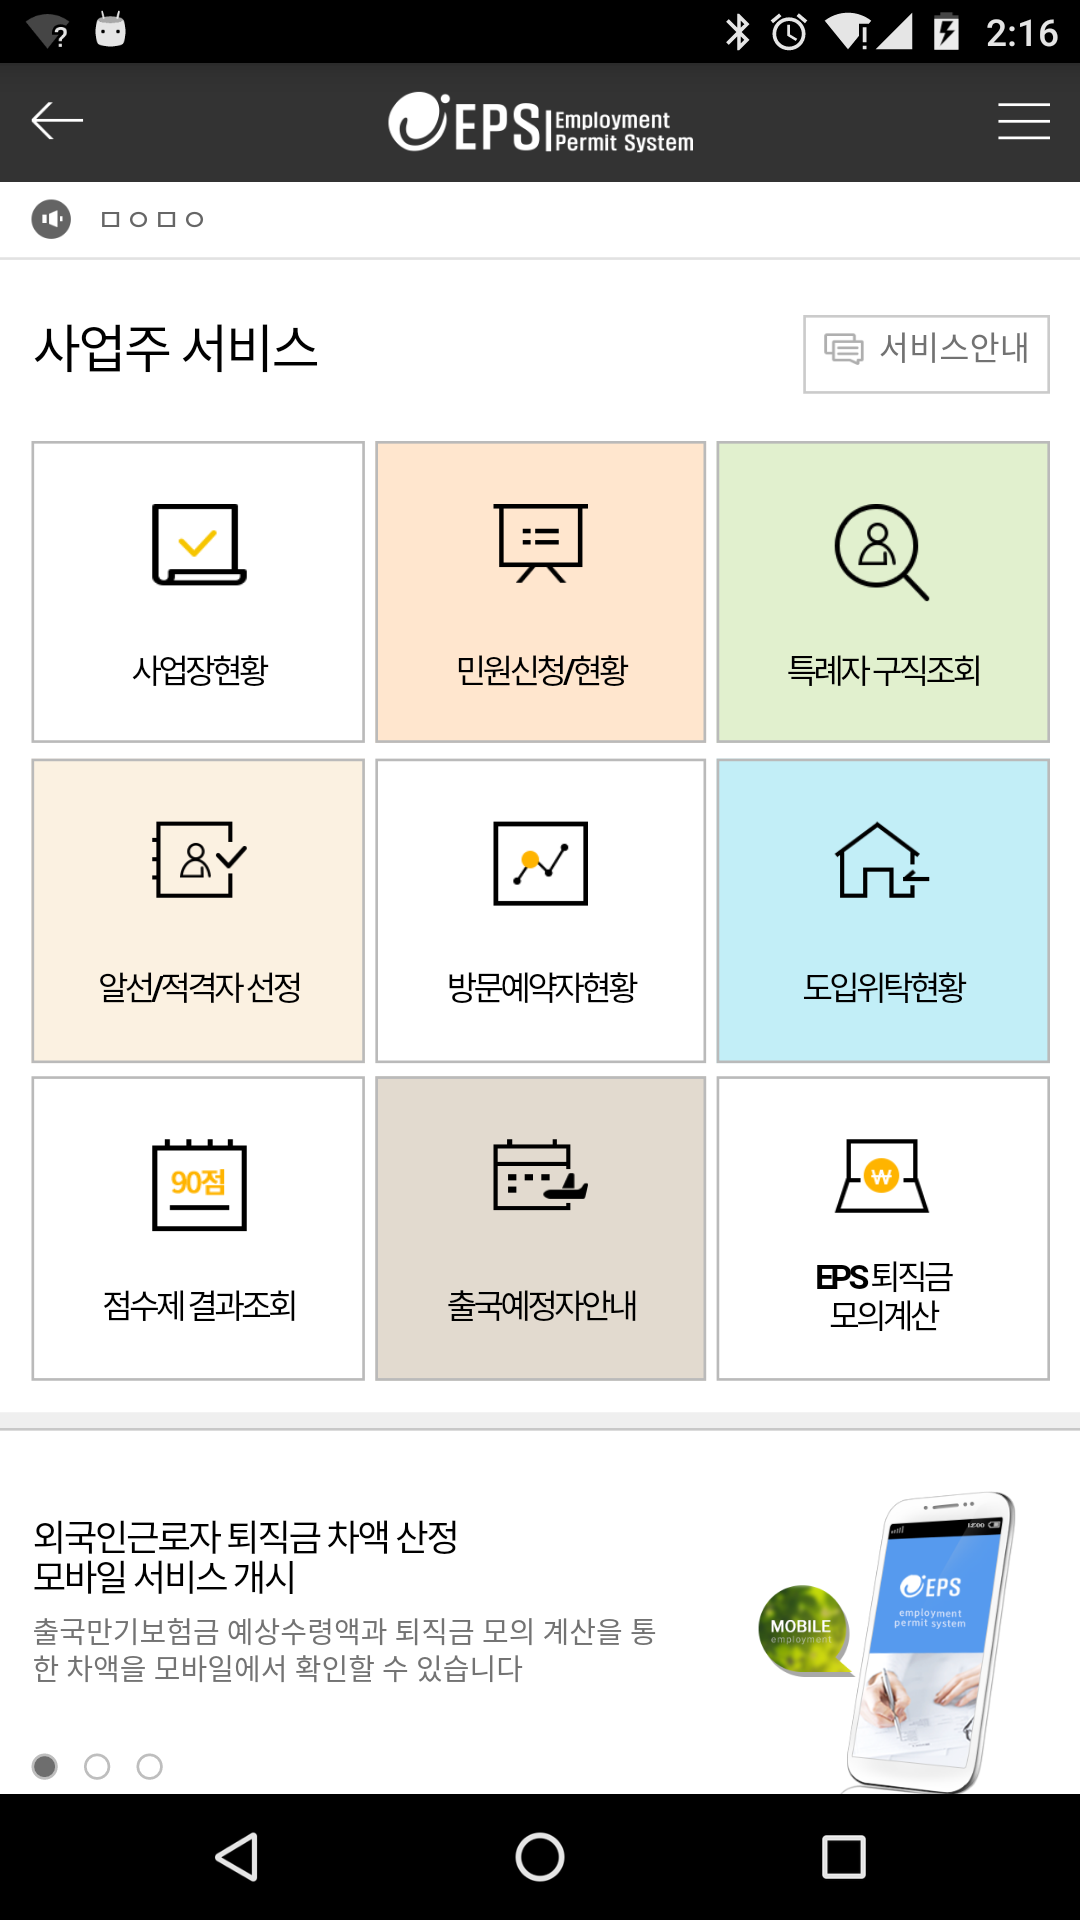 Android application 외국인고용관리 screenshort